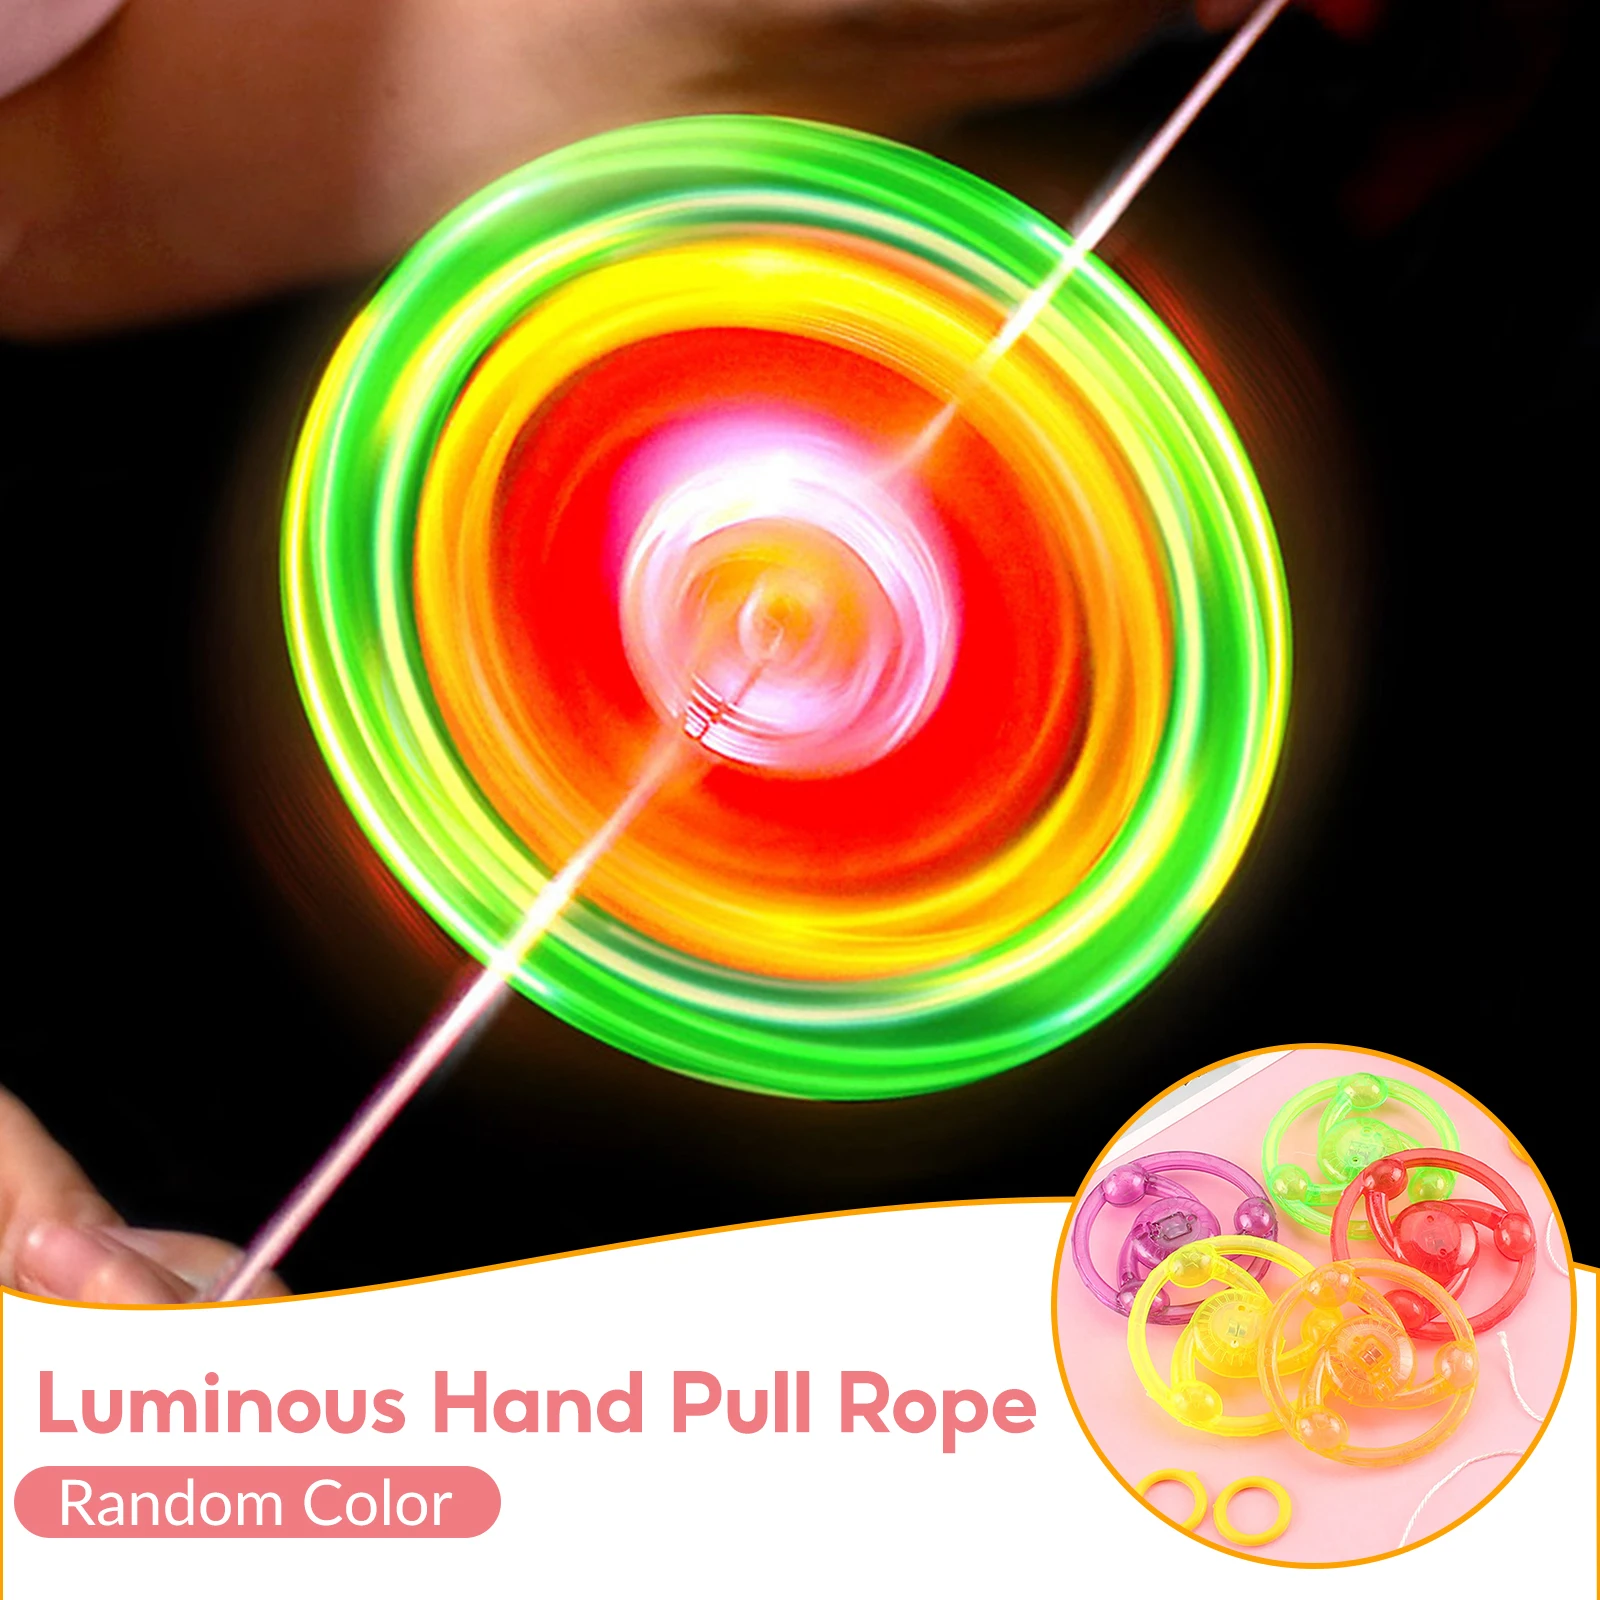 

Led Luminous Hand Pull Rope Flywheel Flashing Glow Rotating Wheel Novelty Toy for Children Favor Party Toys Kids gifts